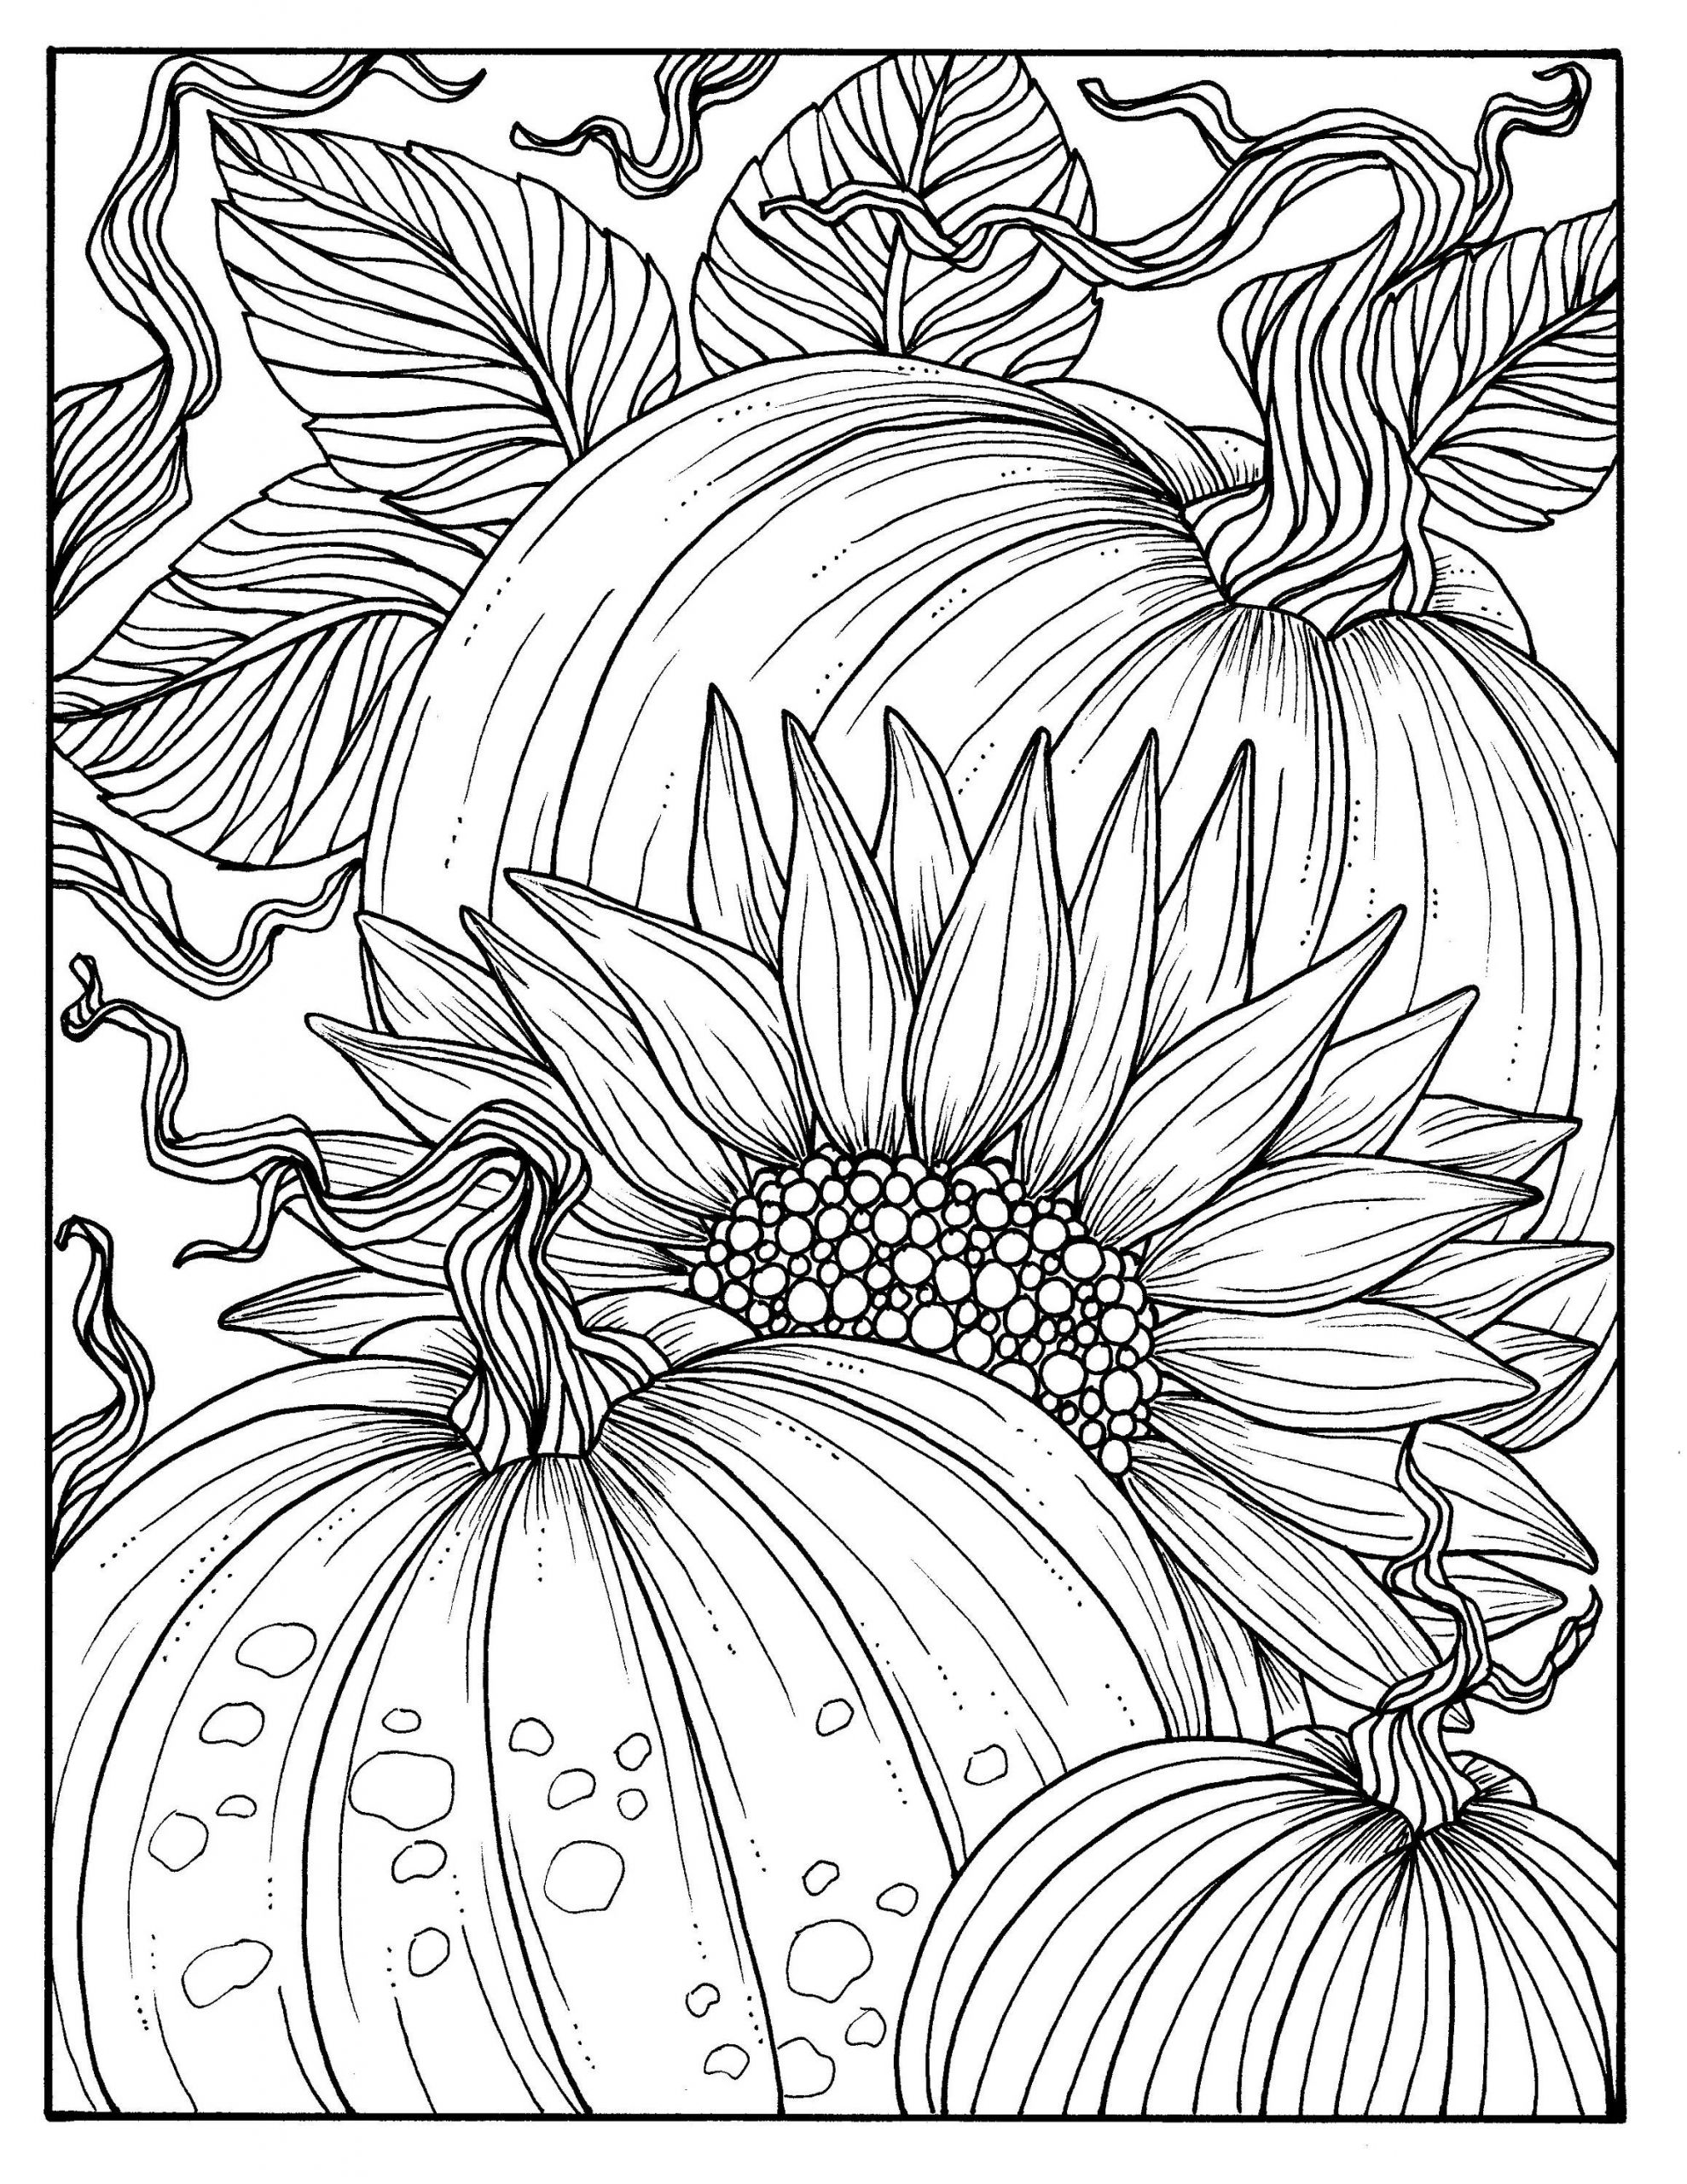 Fall Coloring Pages Adults
 5 Pages Fabulous Fall Digital Downloads to Color Punpkins